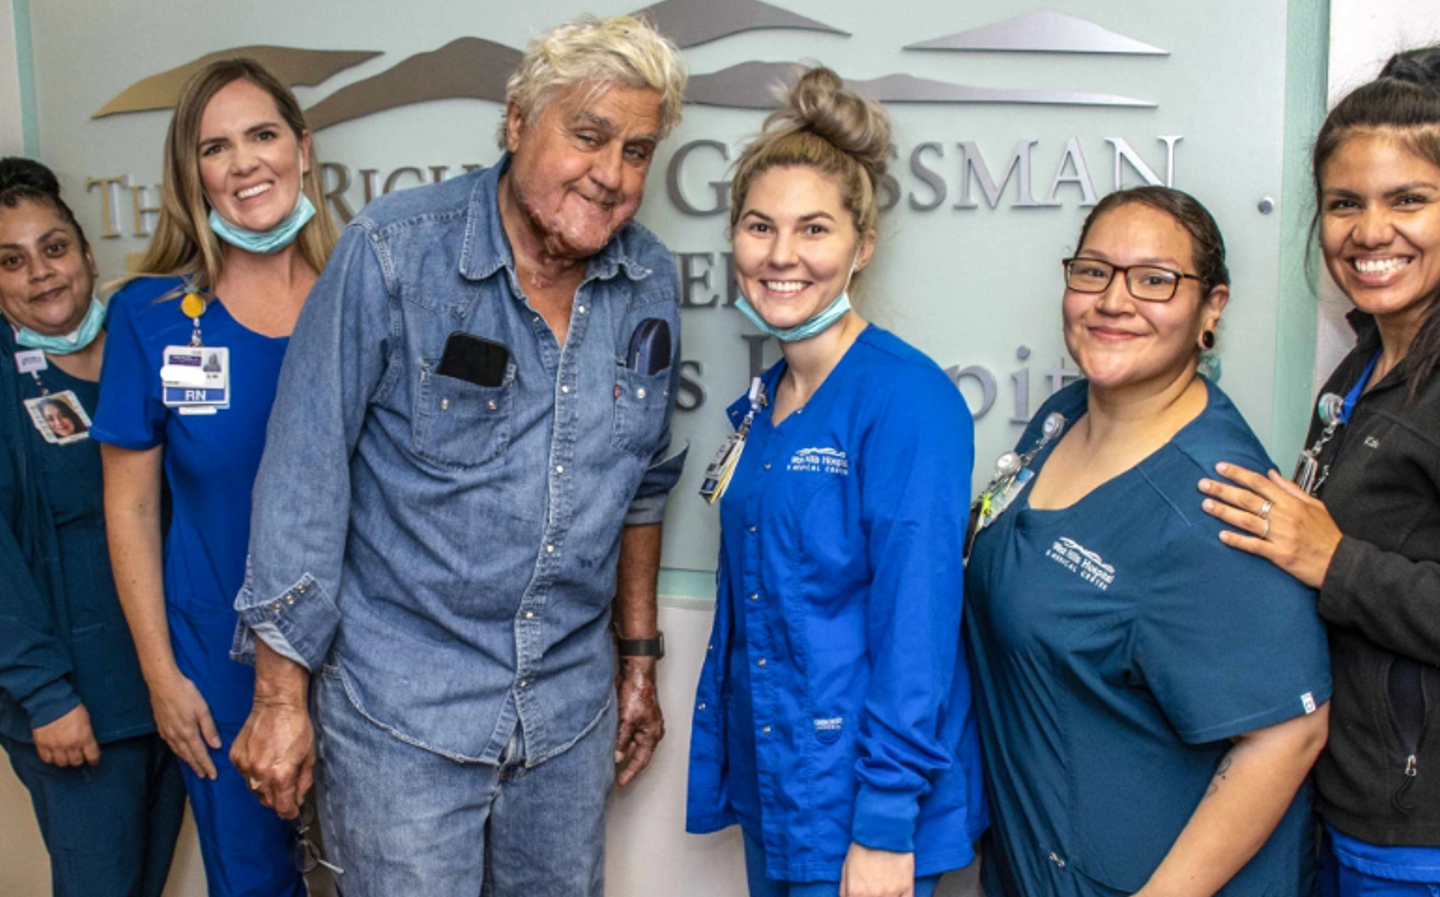 Jay Leno released from hospital after face burns